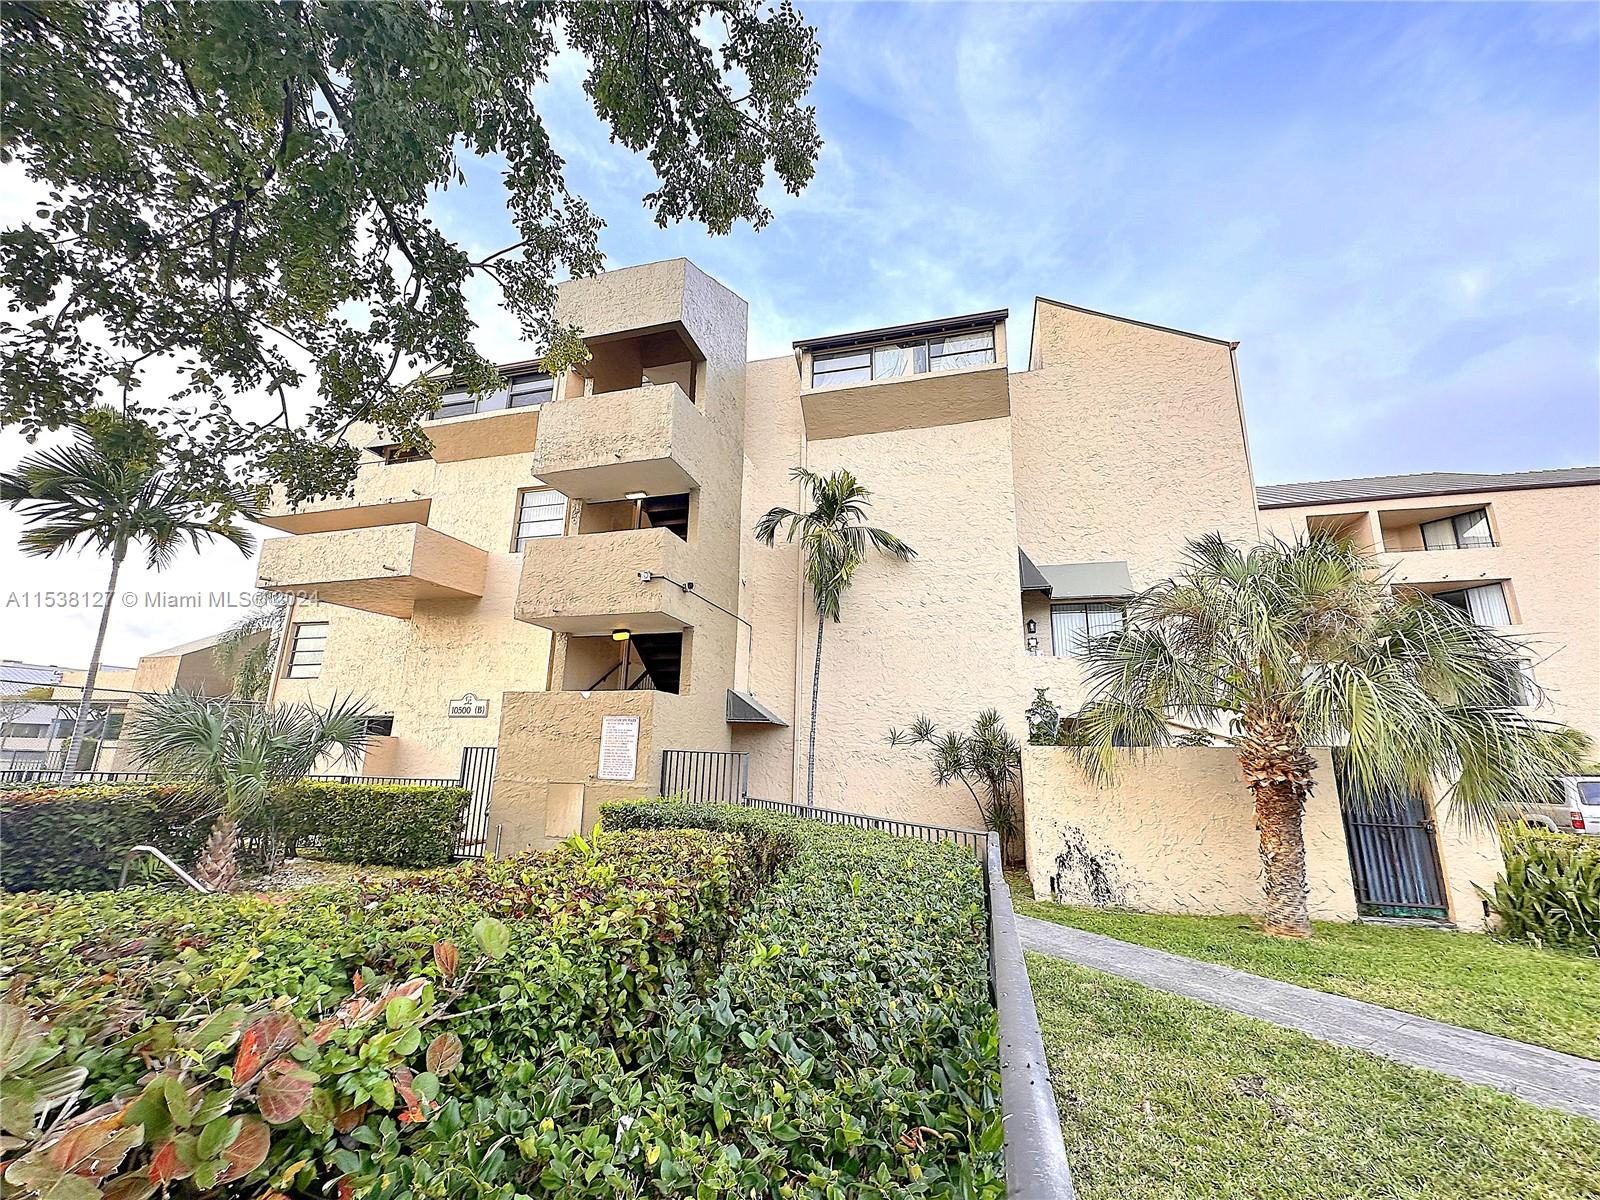 10500 SW 108th Ave #B310 For Sale A11538127, FL